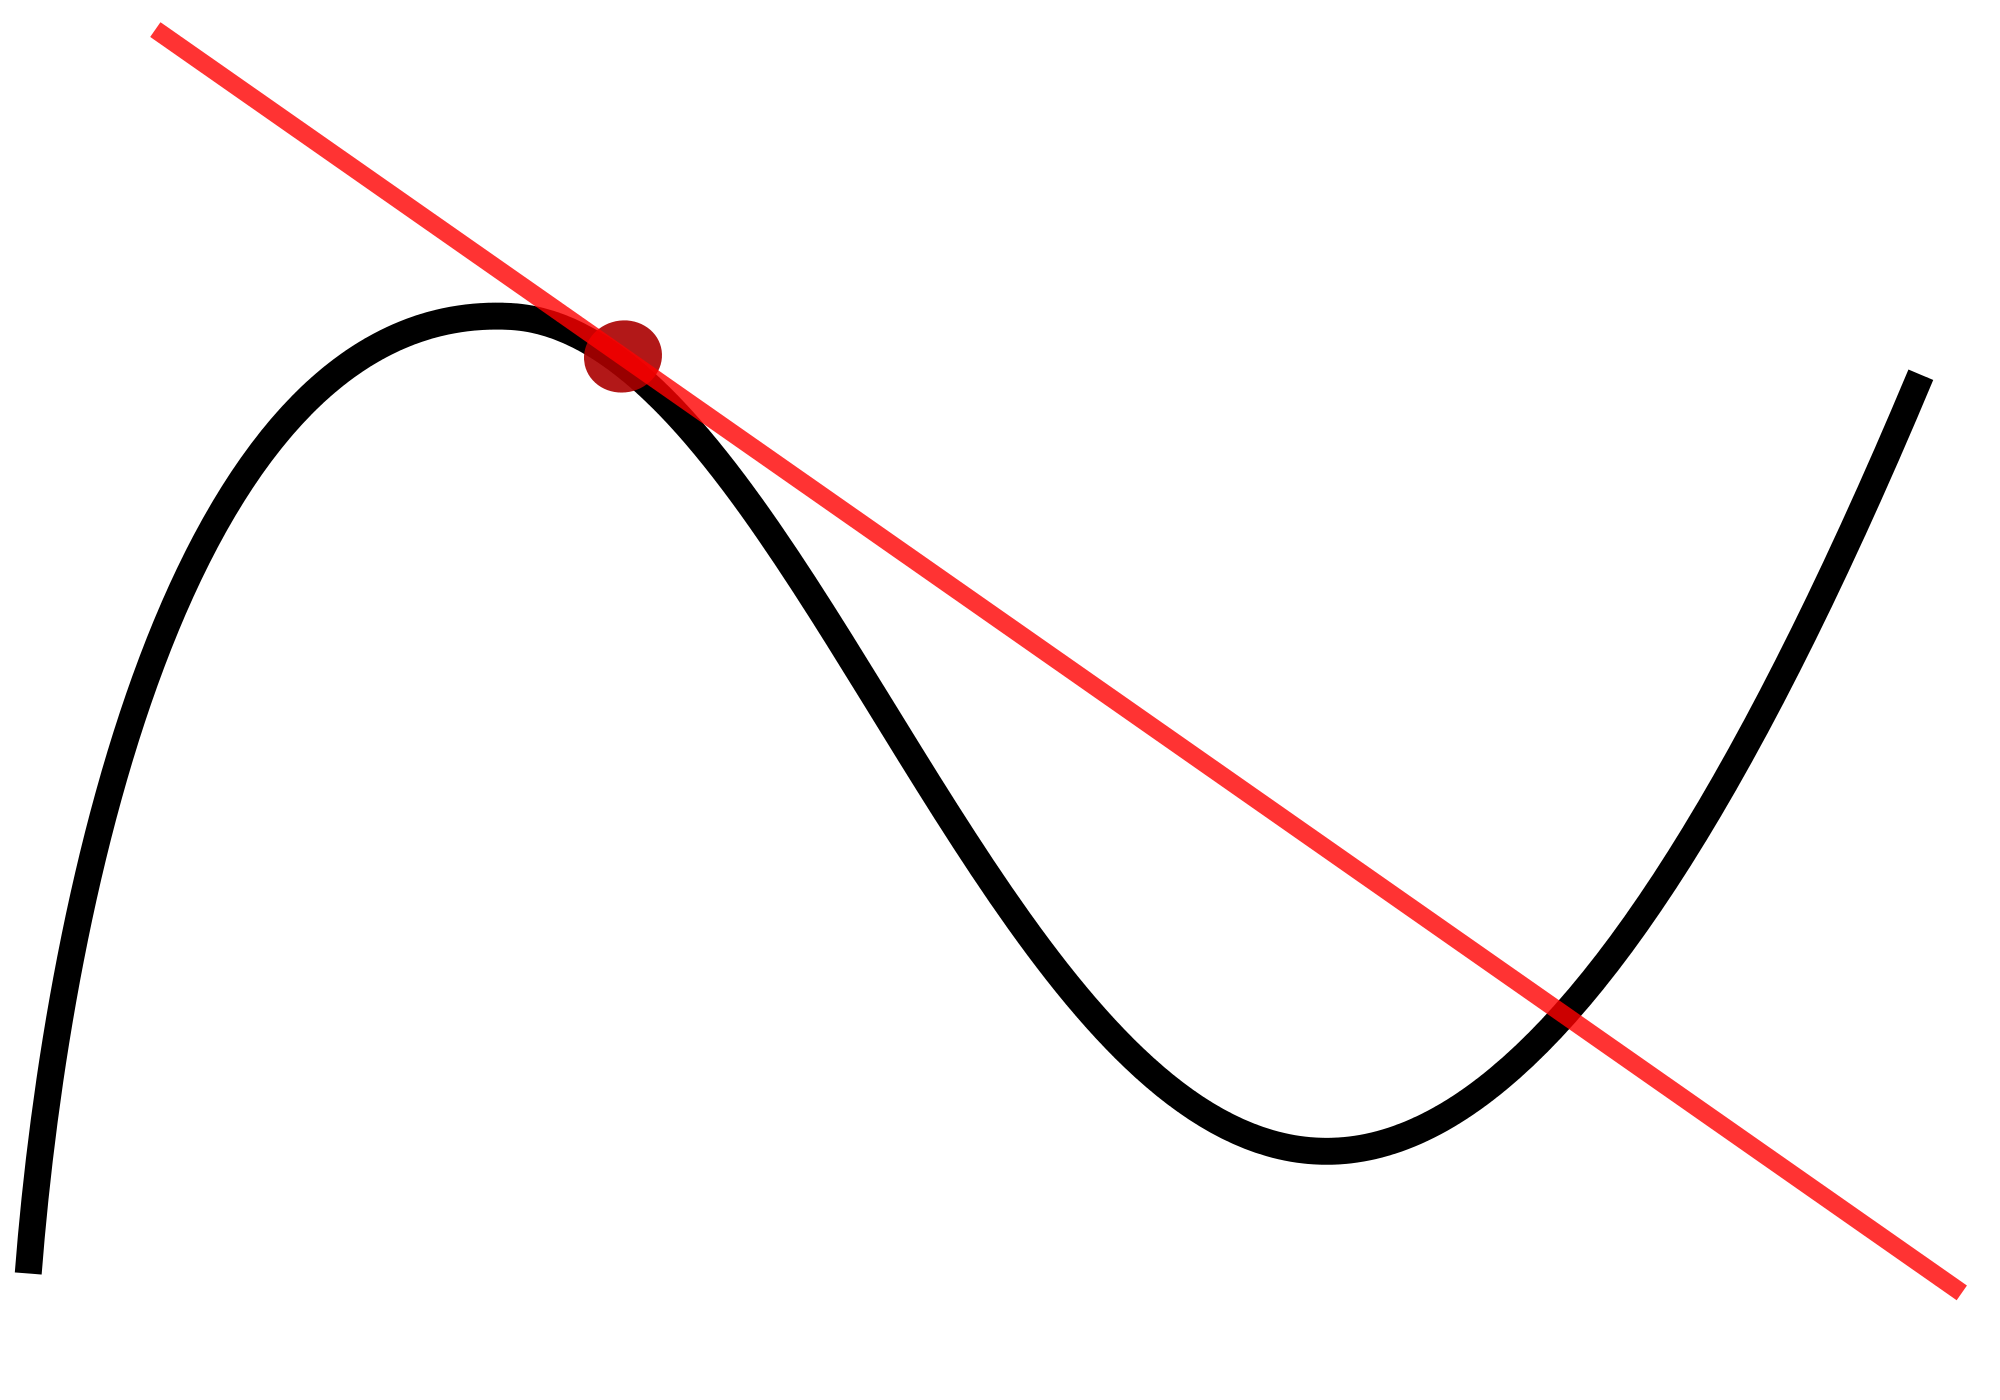 graph clipart red line